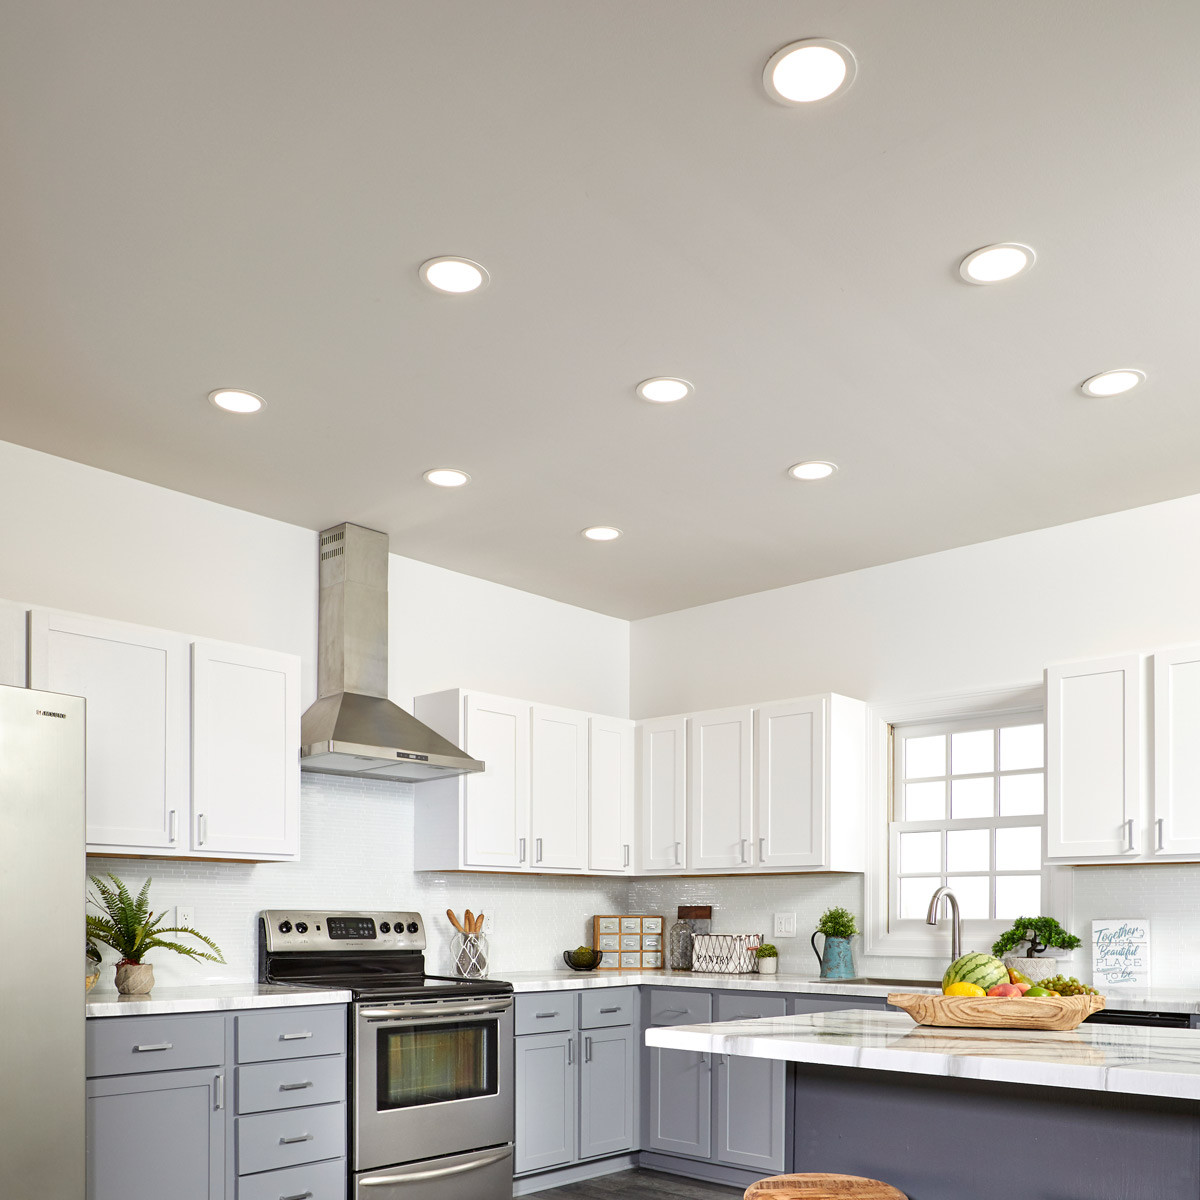 Led Light Kitchen
 How to Install Low Profile LED Lights in Your Kitchen